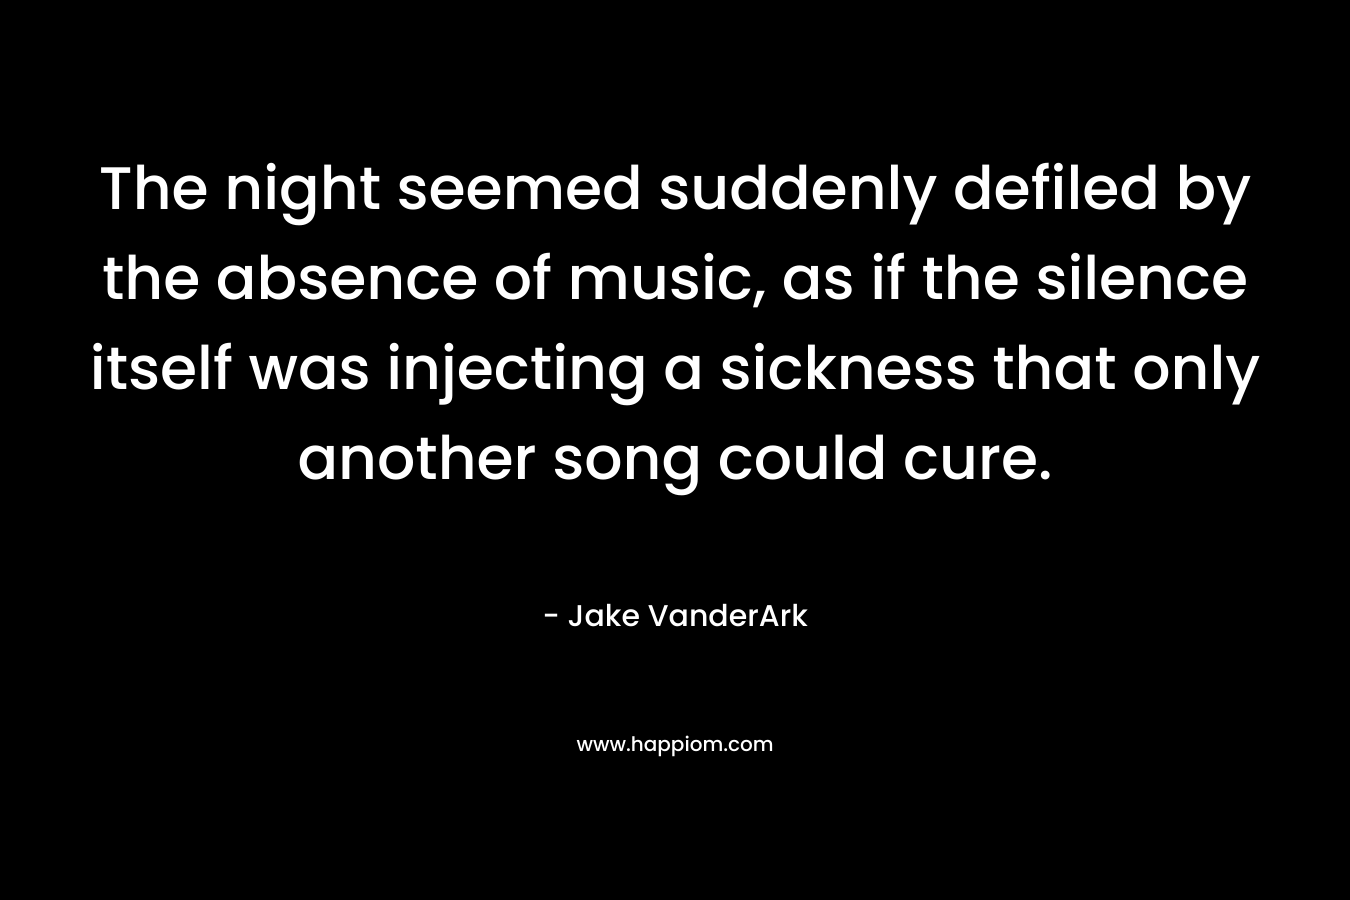 The night seemed suddenly defiled by the absence of music, as if the silence itself was injecting a sickness that only another song could cure.